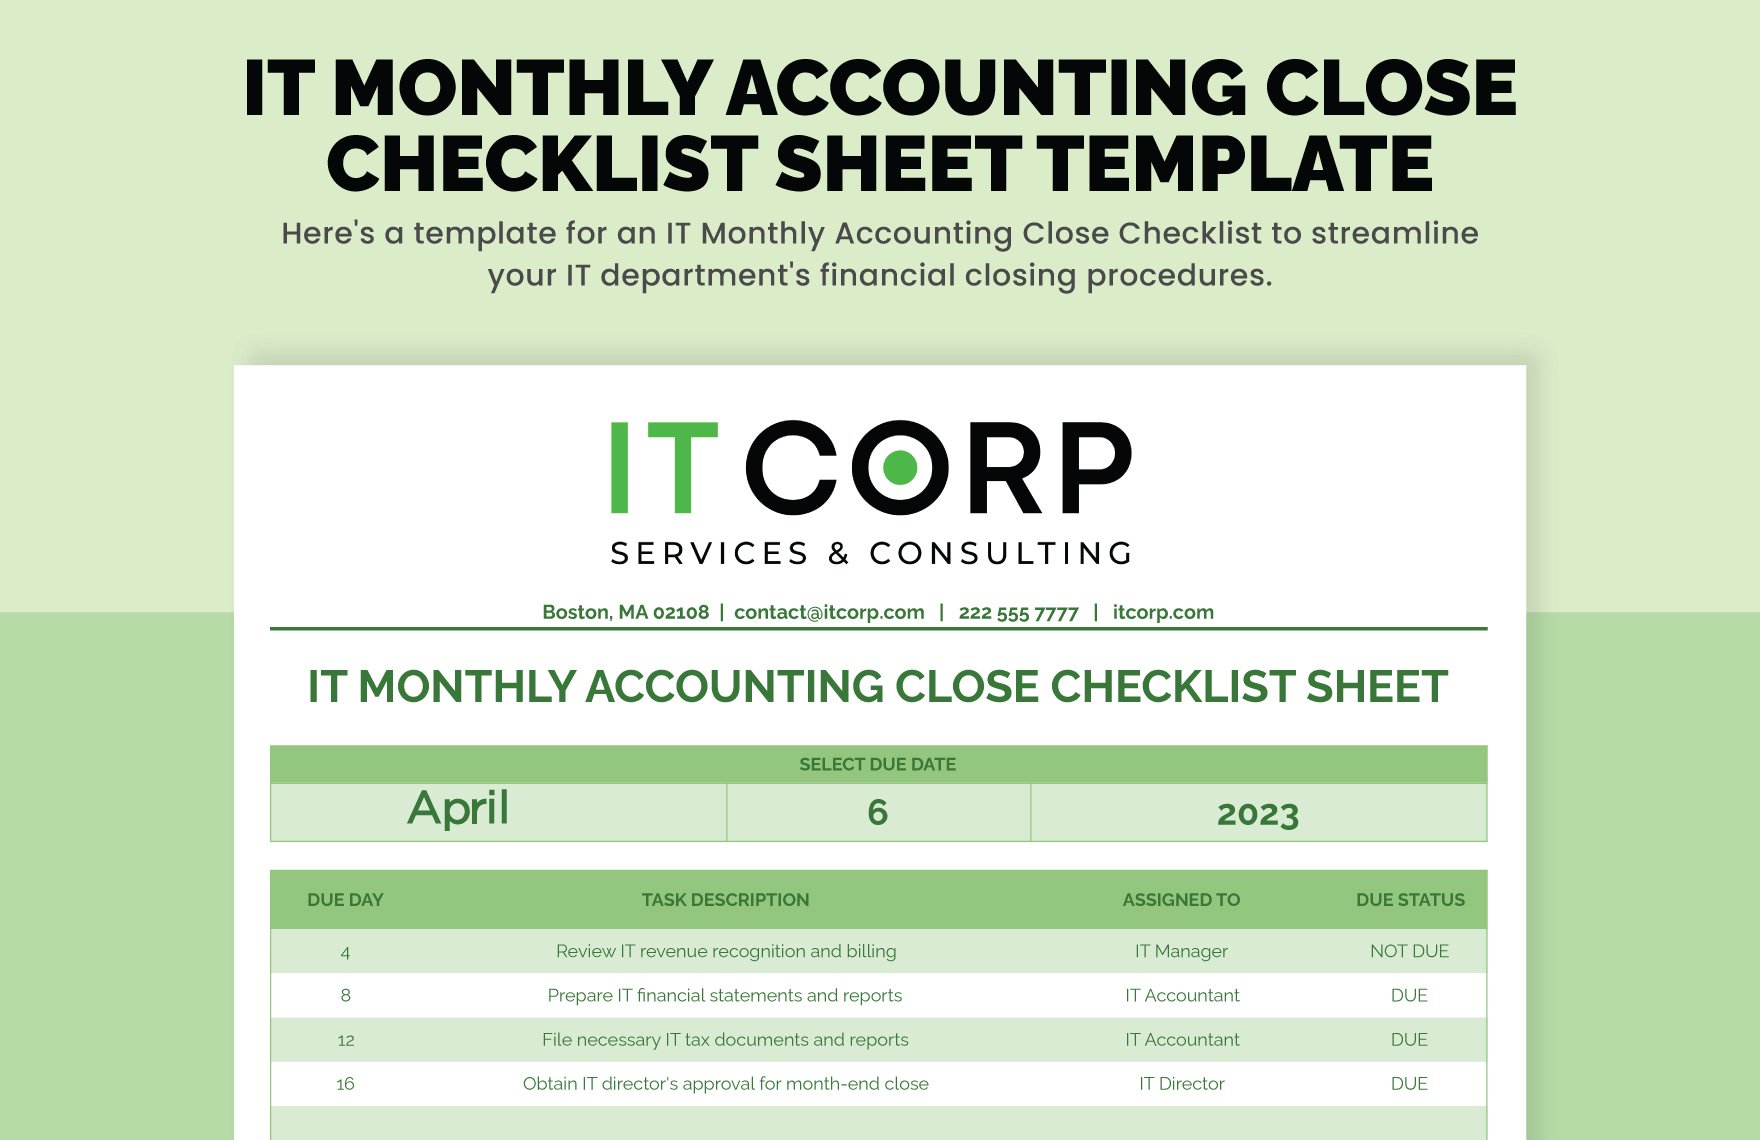 IT Monthly Accounting Close Checklist Sheet Template